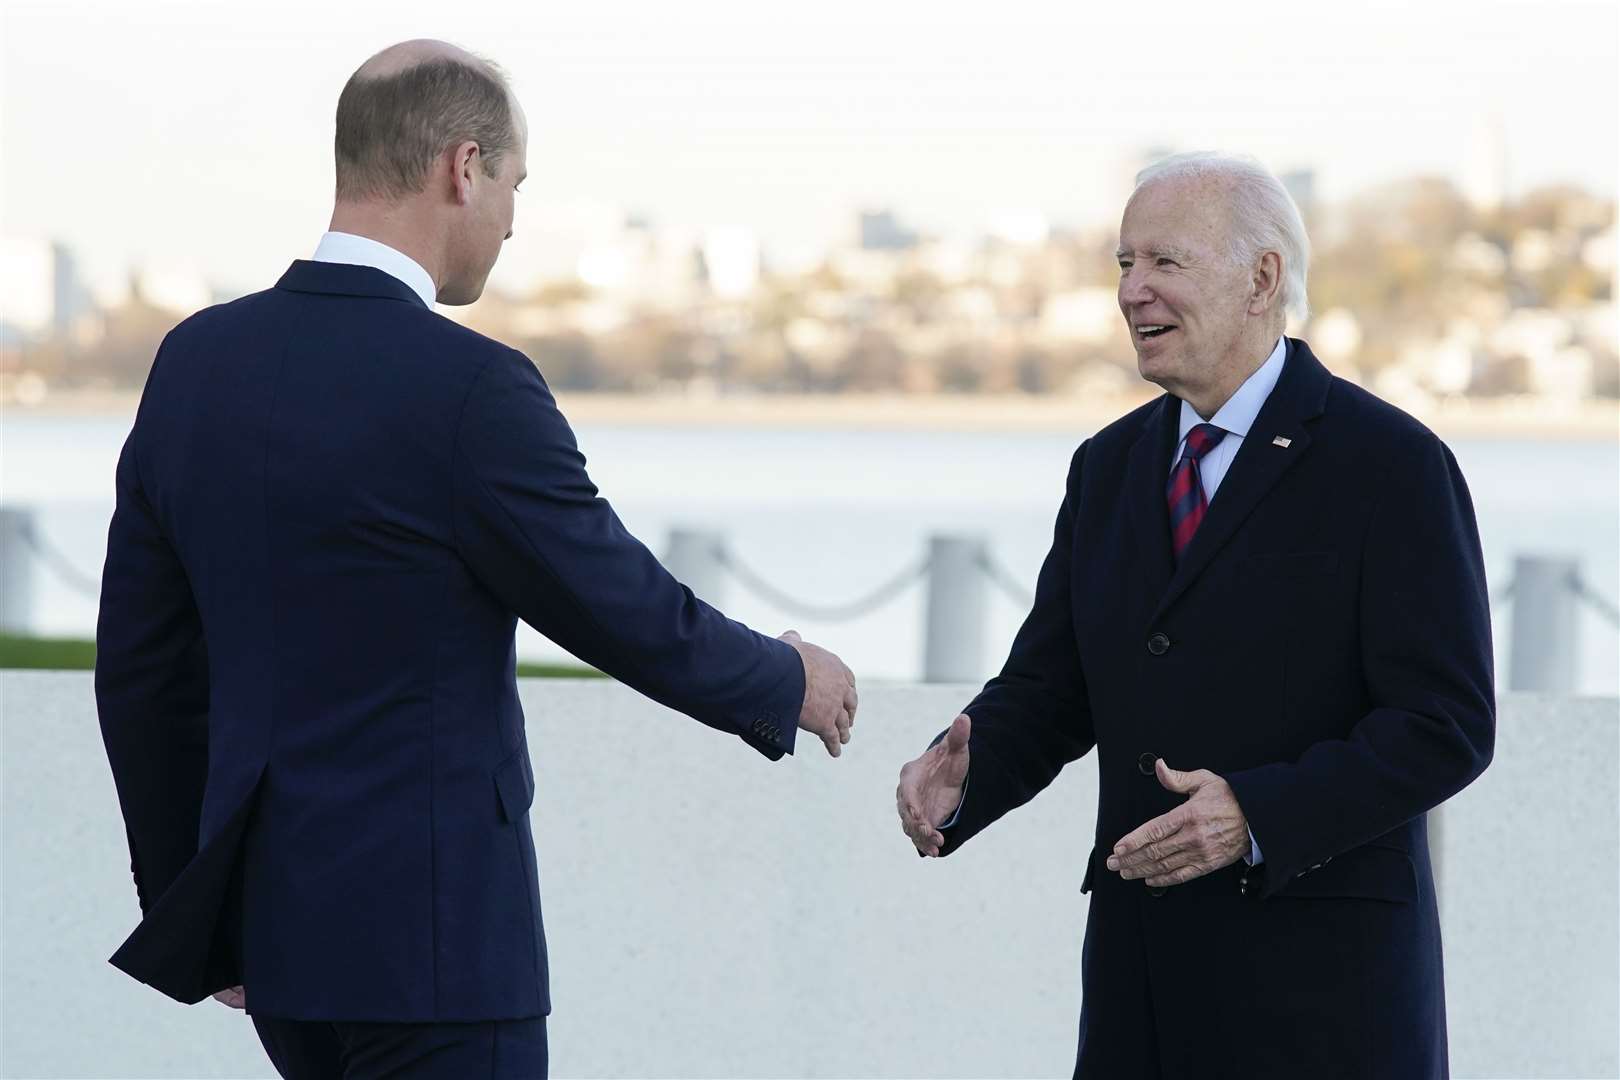 William shakes hands with President Joe Biden as they meet outside the John F. Kennedy Presidential Library and Museum (Patrick Semansky/AP/PA)